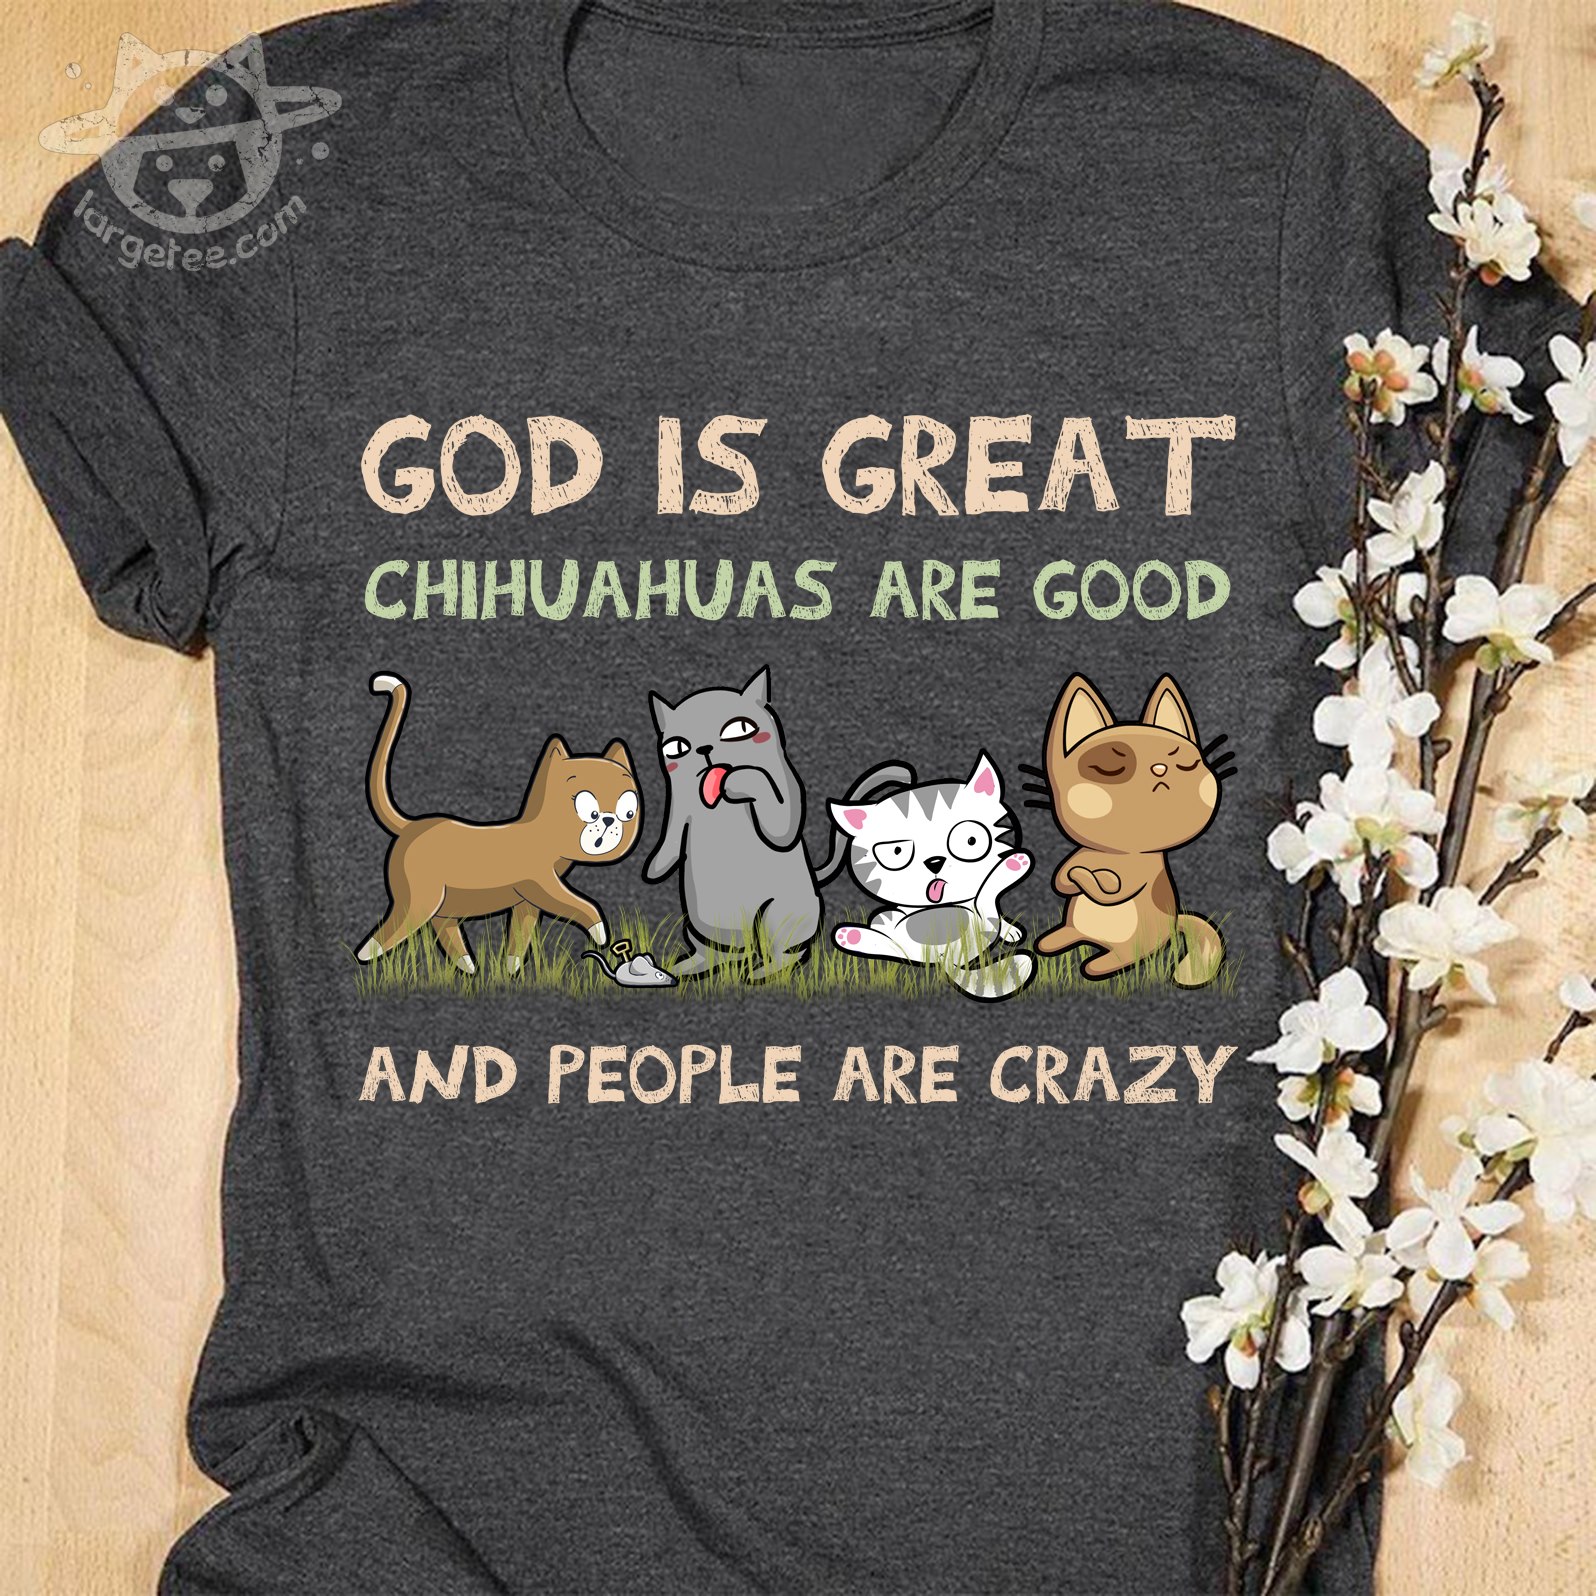 God is great chihuahuas are good and people are crazy - Dog lover